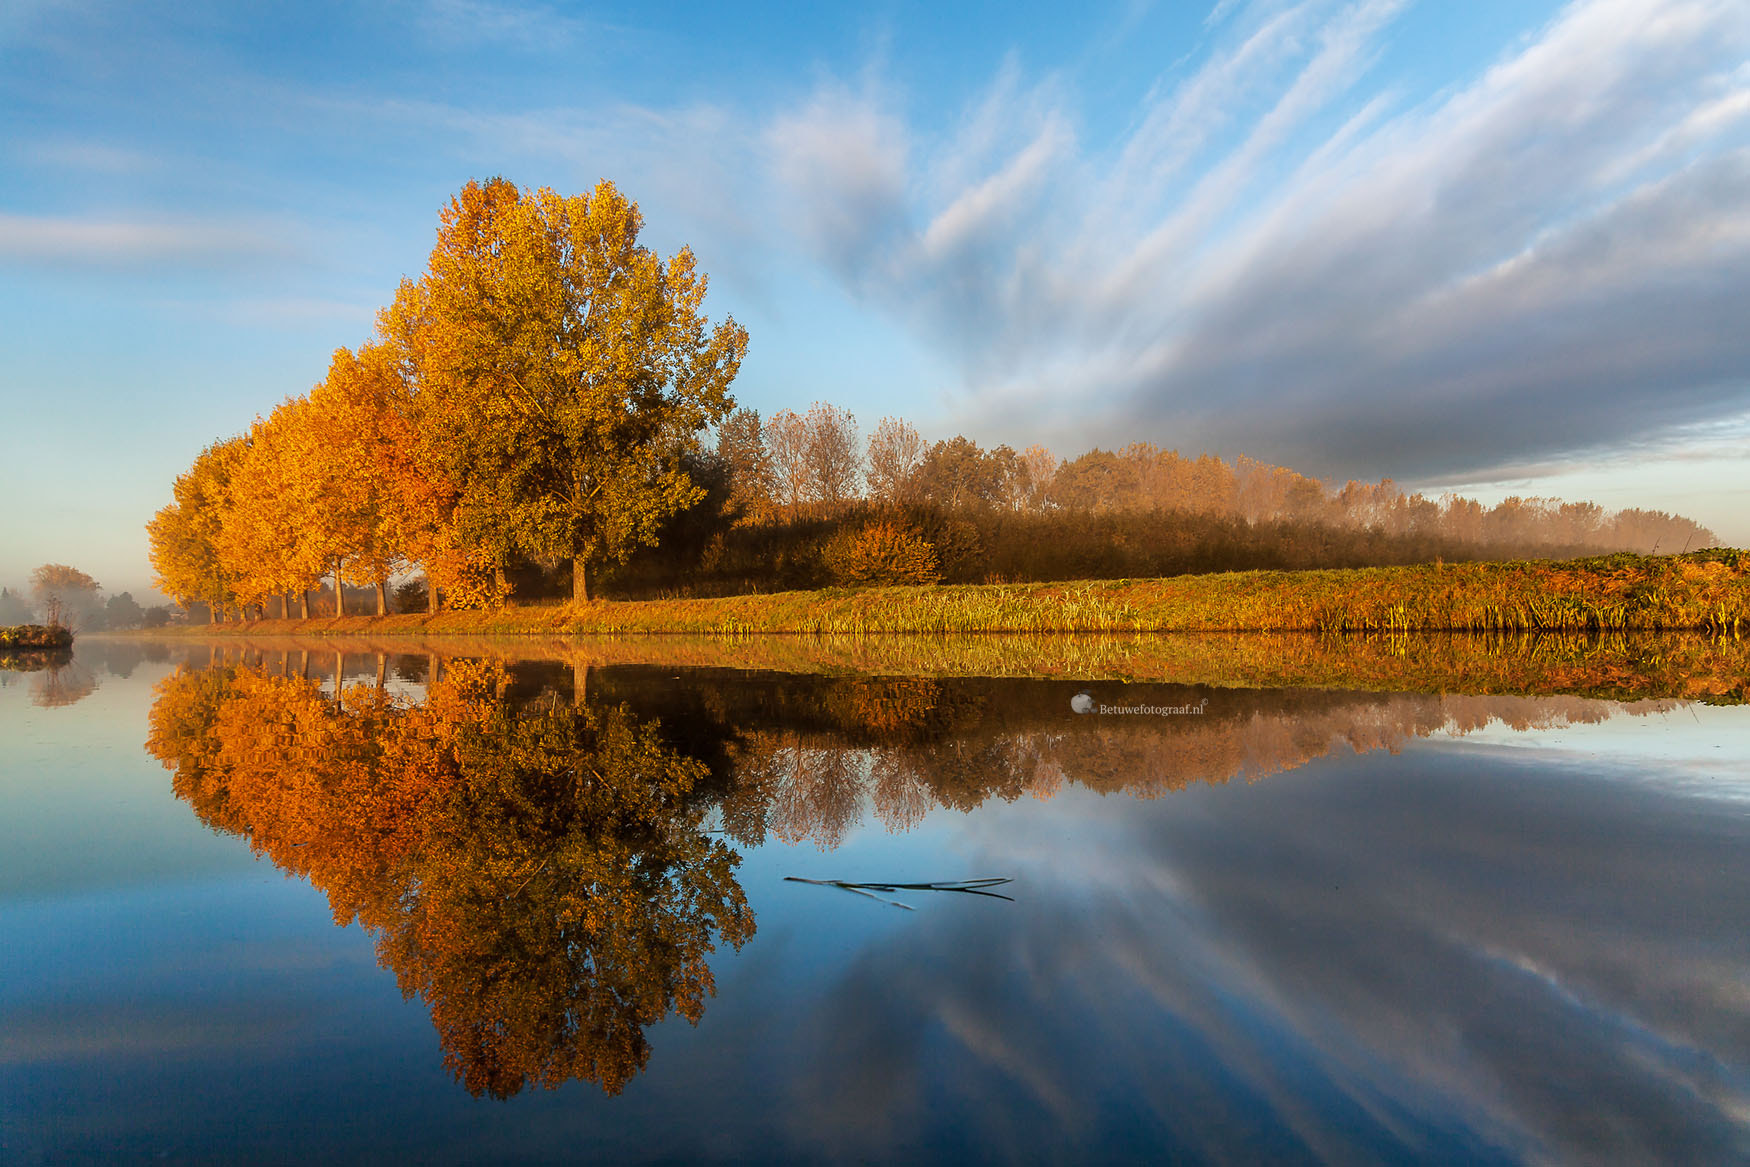 Canon EOS 5D Mark II + Sigma 24-105mm f/4 DG OS HSM | A sample photo. Autumn reflection this morning in holland photography